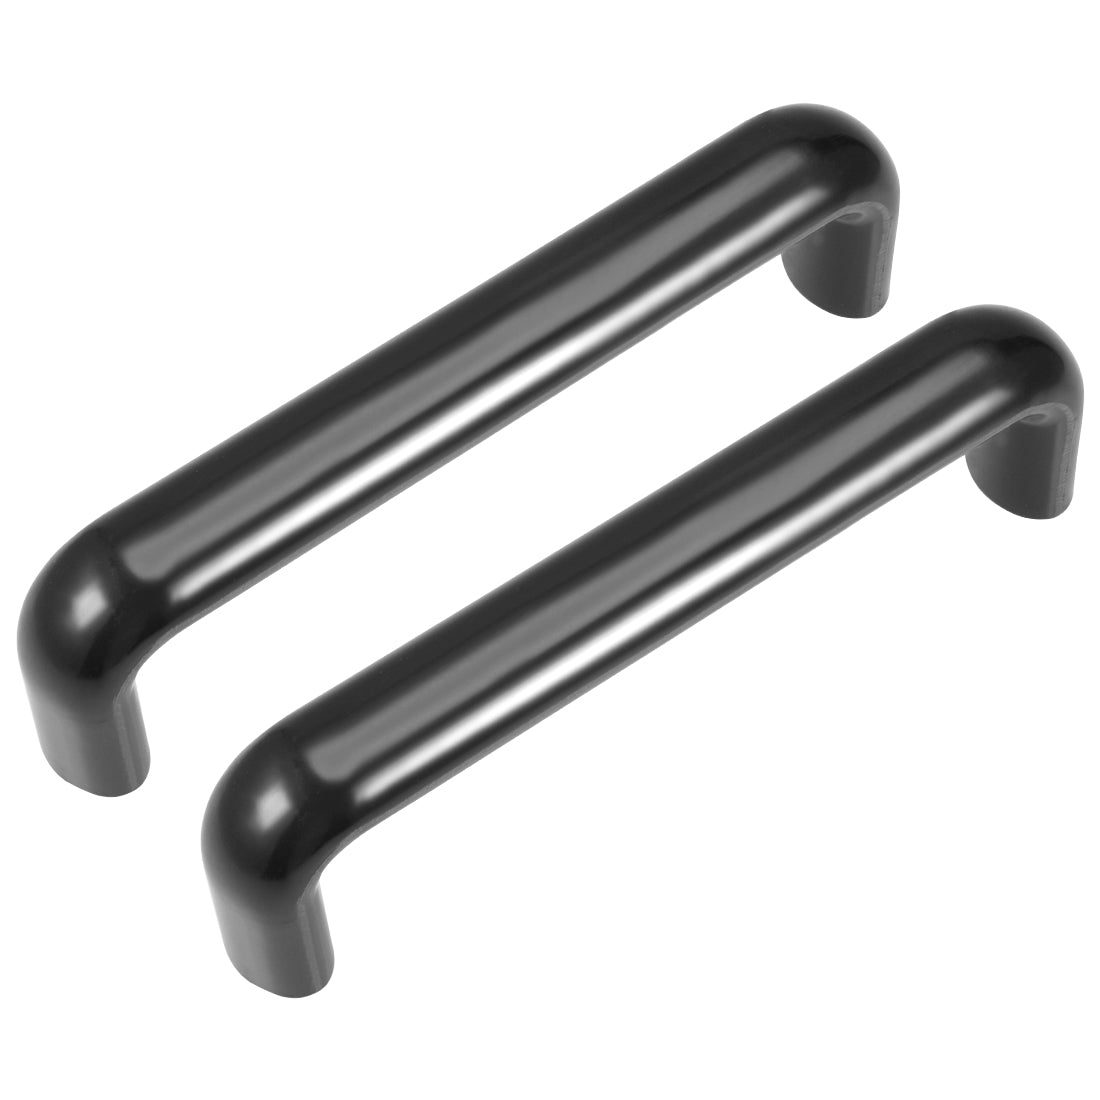 uxcell Uxcell Bakelite Pulls Handles 200mm Hole Centers Black for Industrial Machine 2Pcs